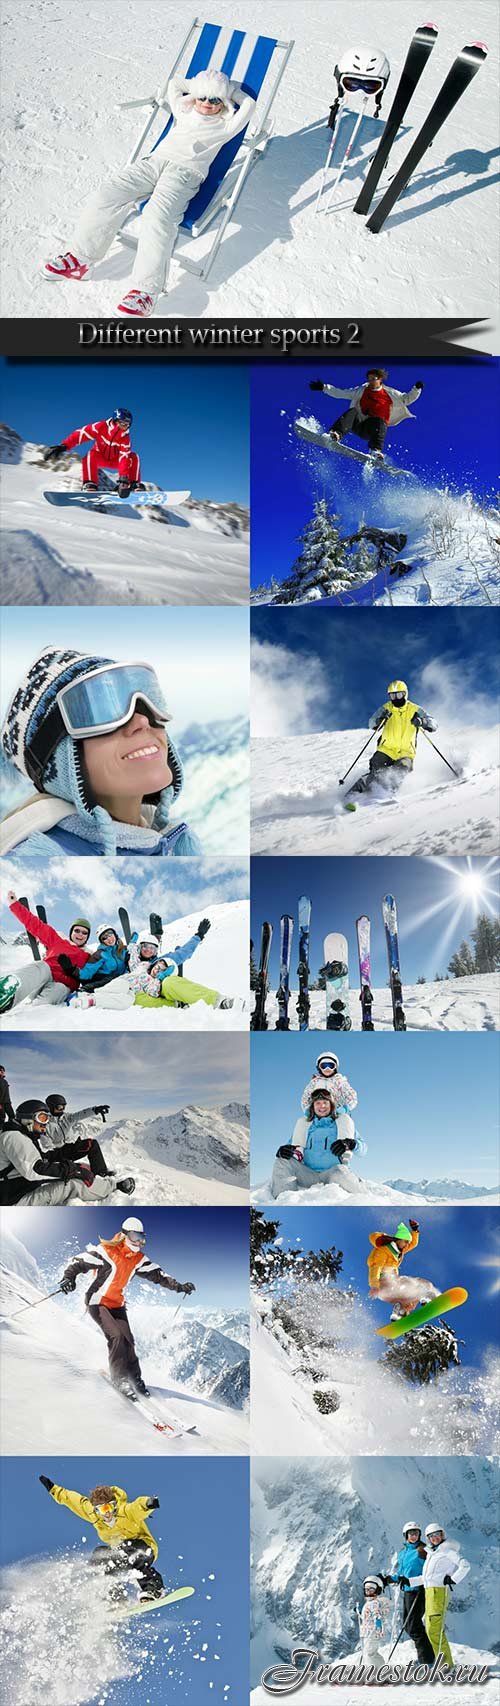 Different winter sports 2